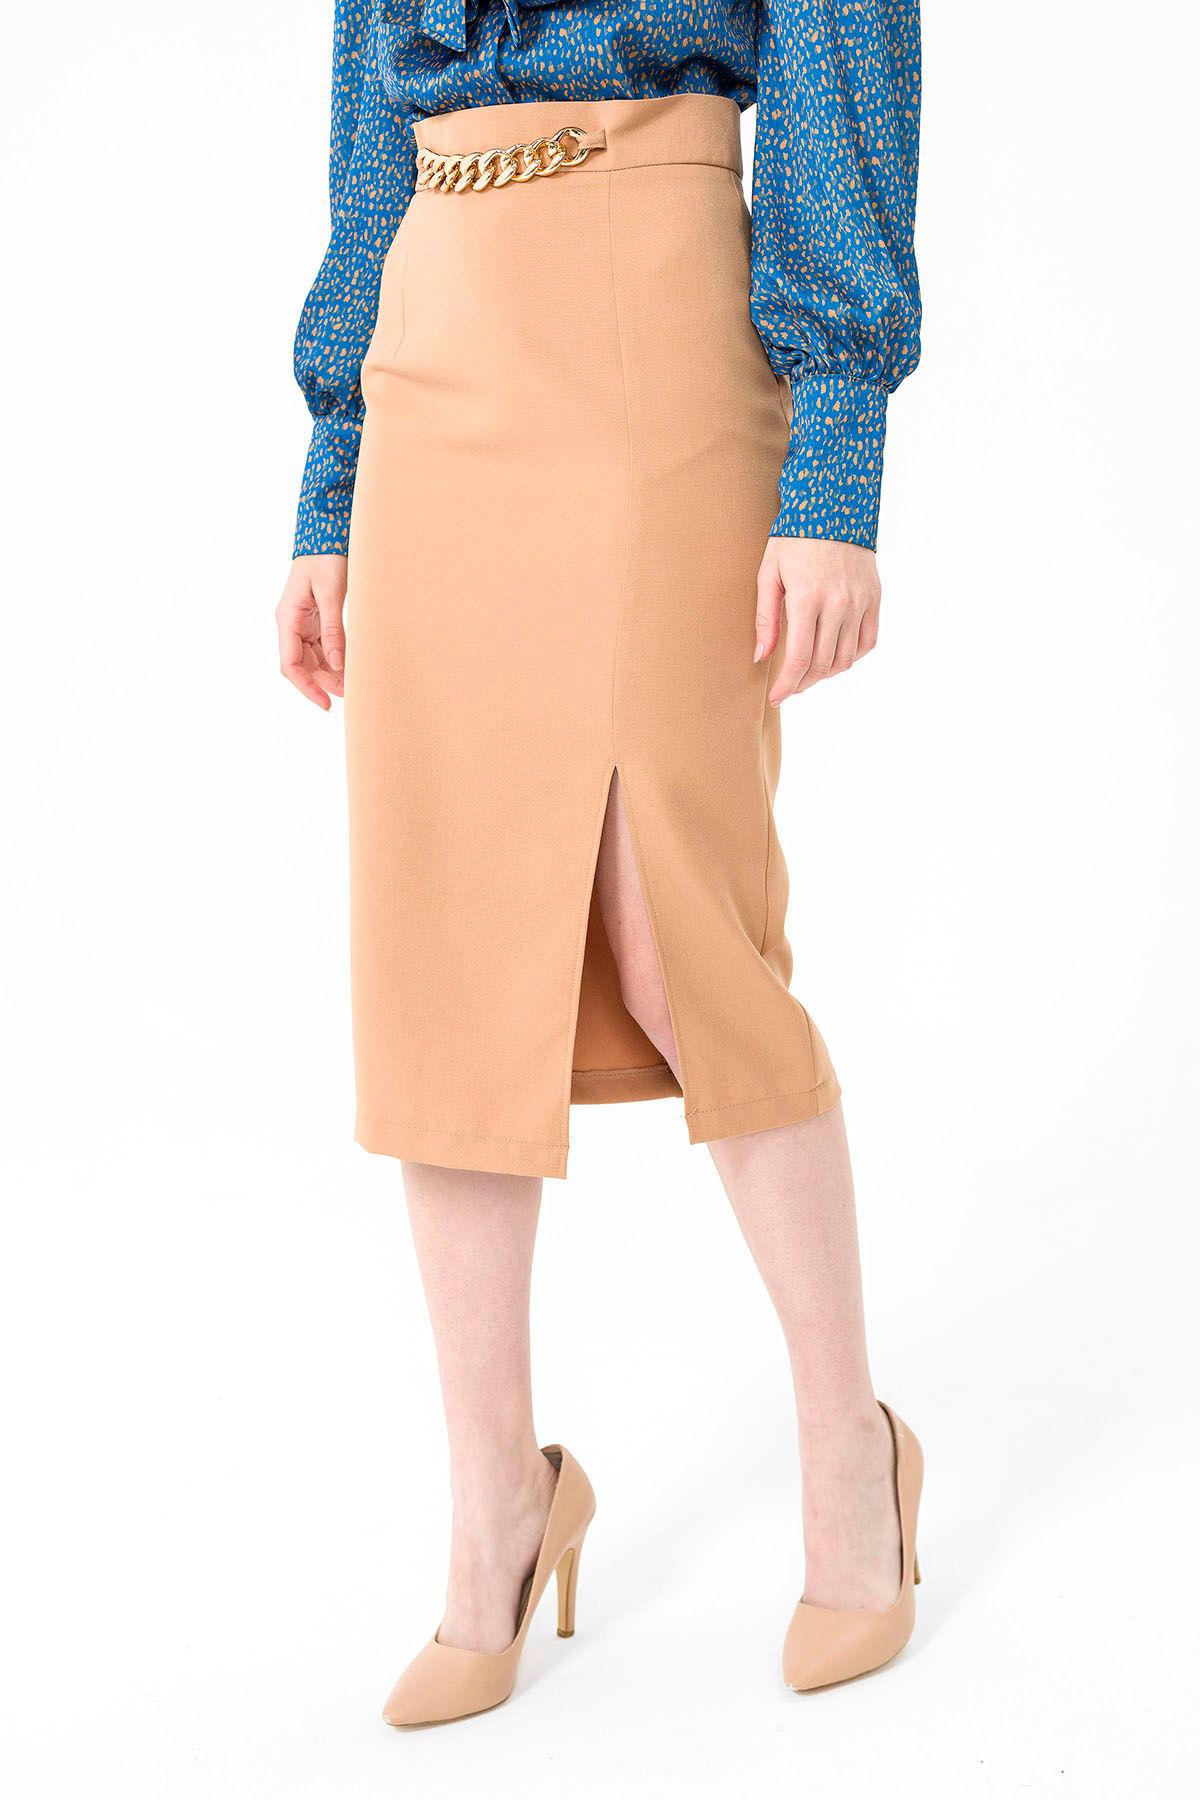 camel solid pattern skirt with gold detail